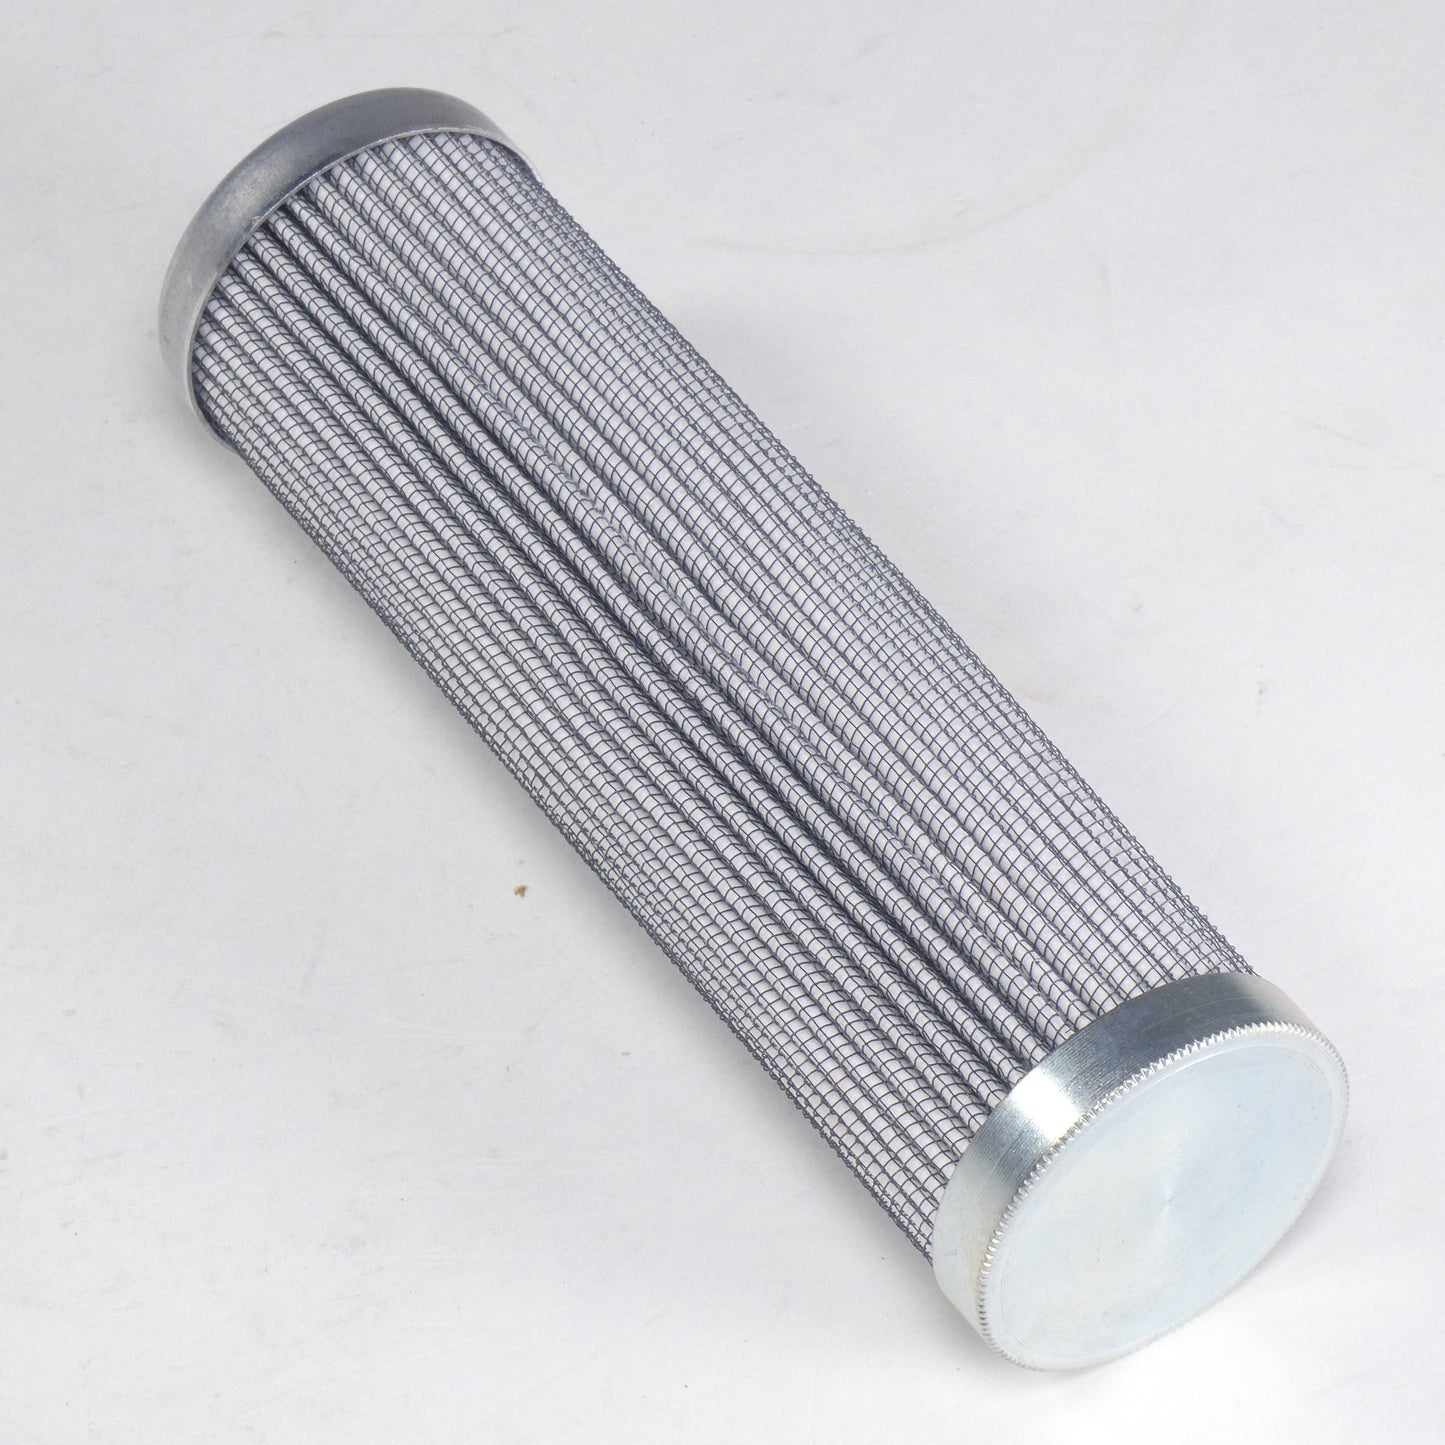 Hydrafil Replacement Filter Element for Unitech AA110A005